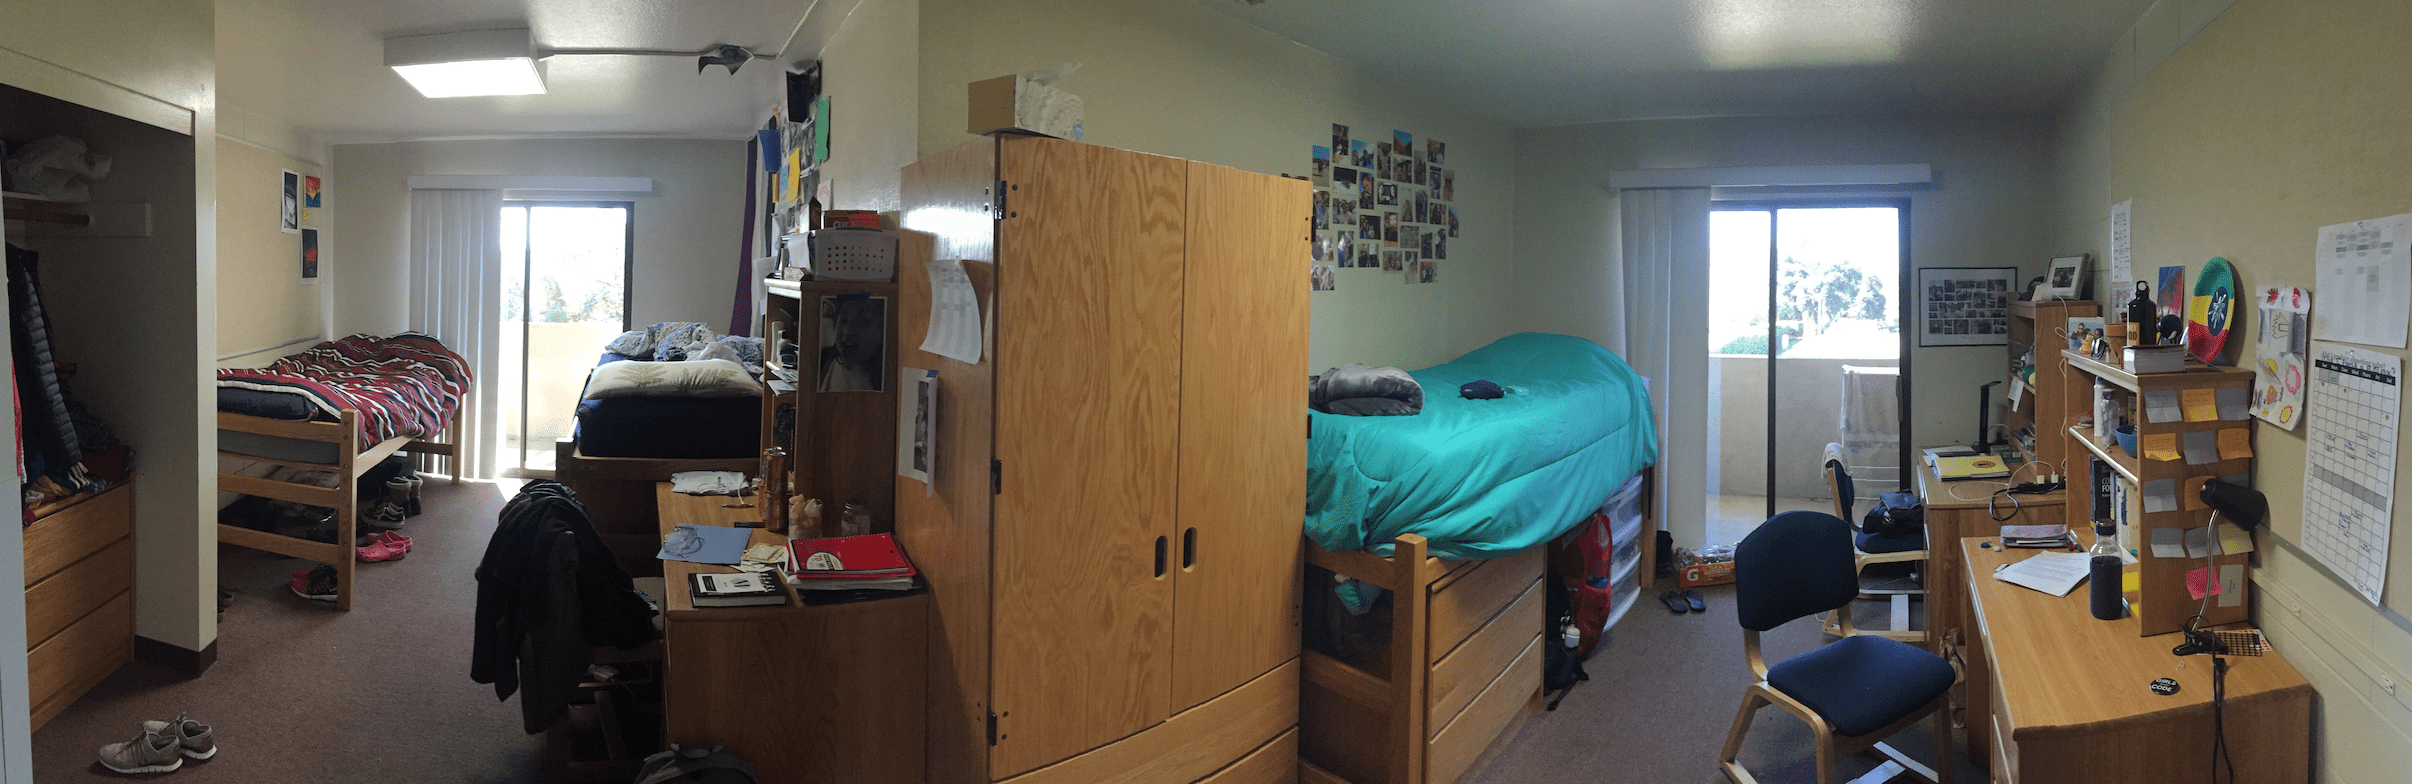 Image of a college dorm room with beds, dressers, and desks.